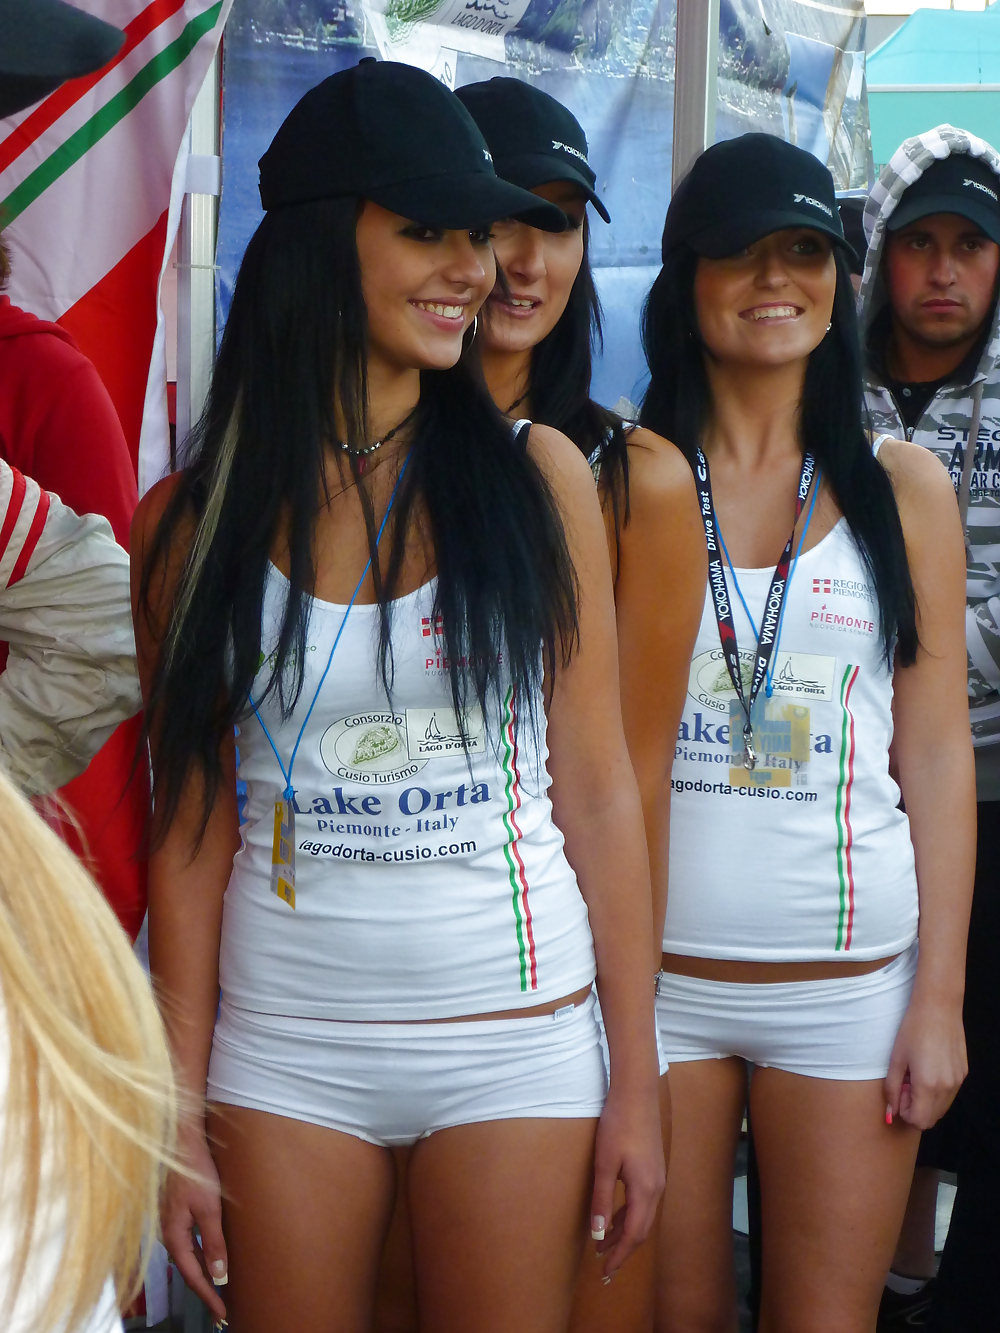 Cute girls from show or motorsport #11965995